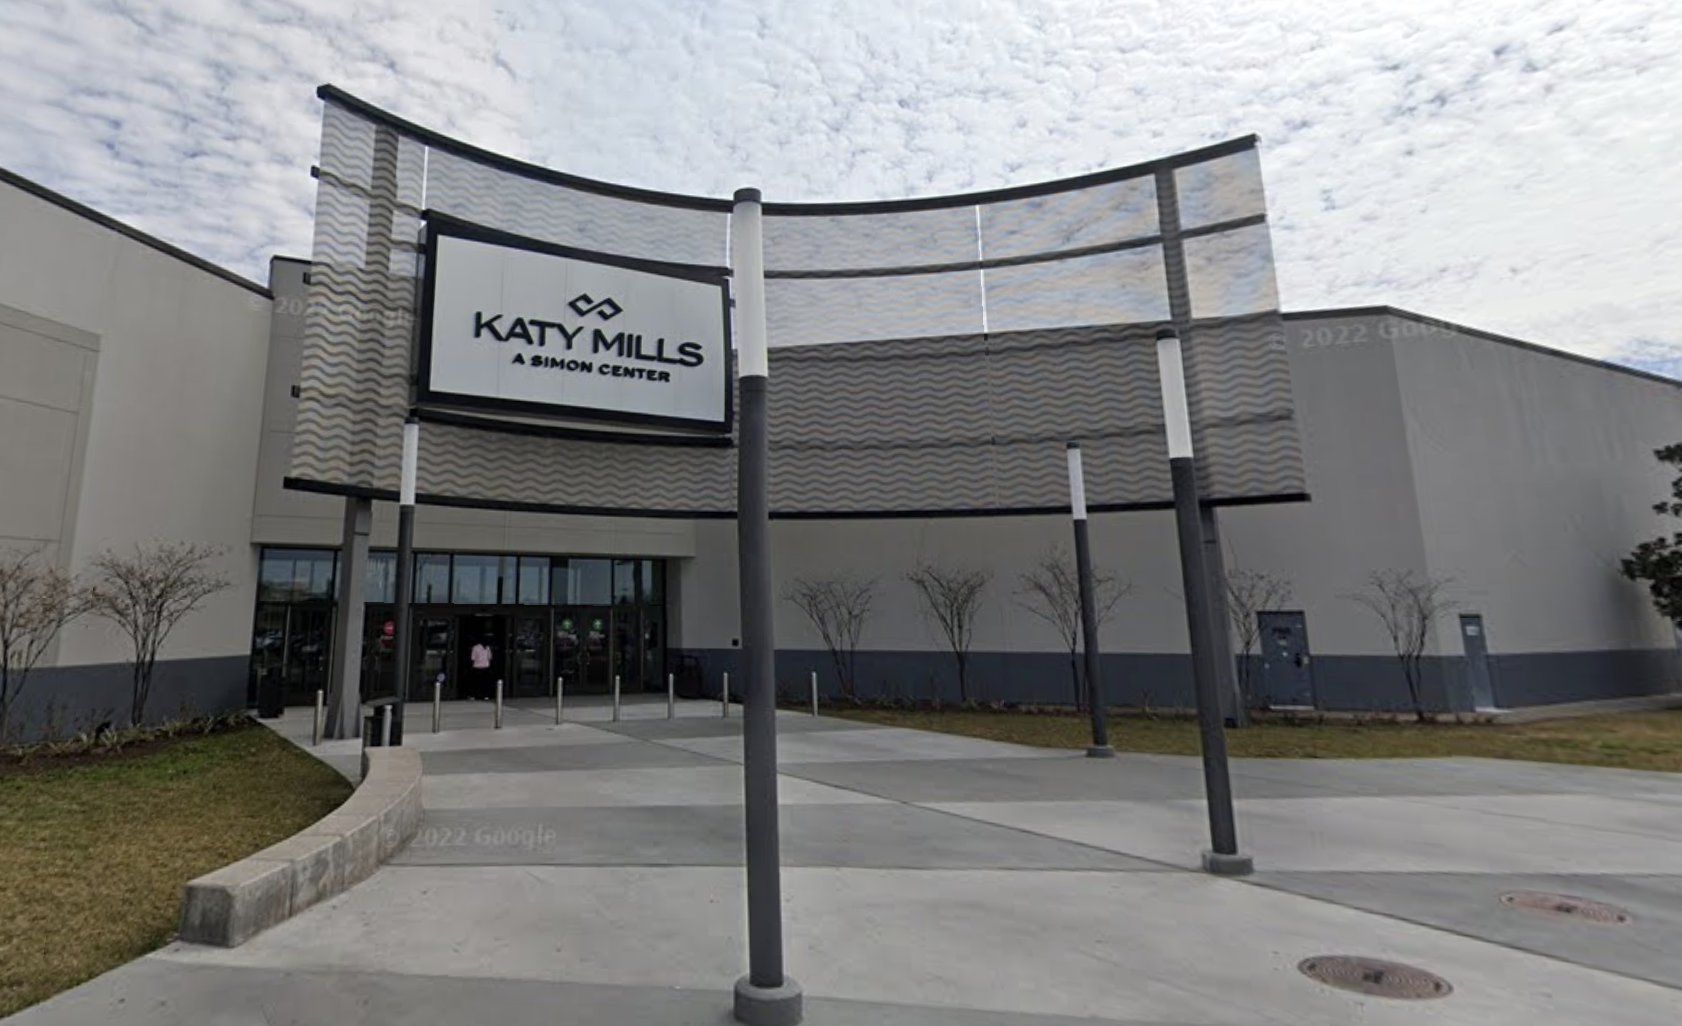 U.S. POLO ASSOCIATION at Katy Mills® - A Shopping Center in Katy